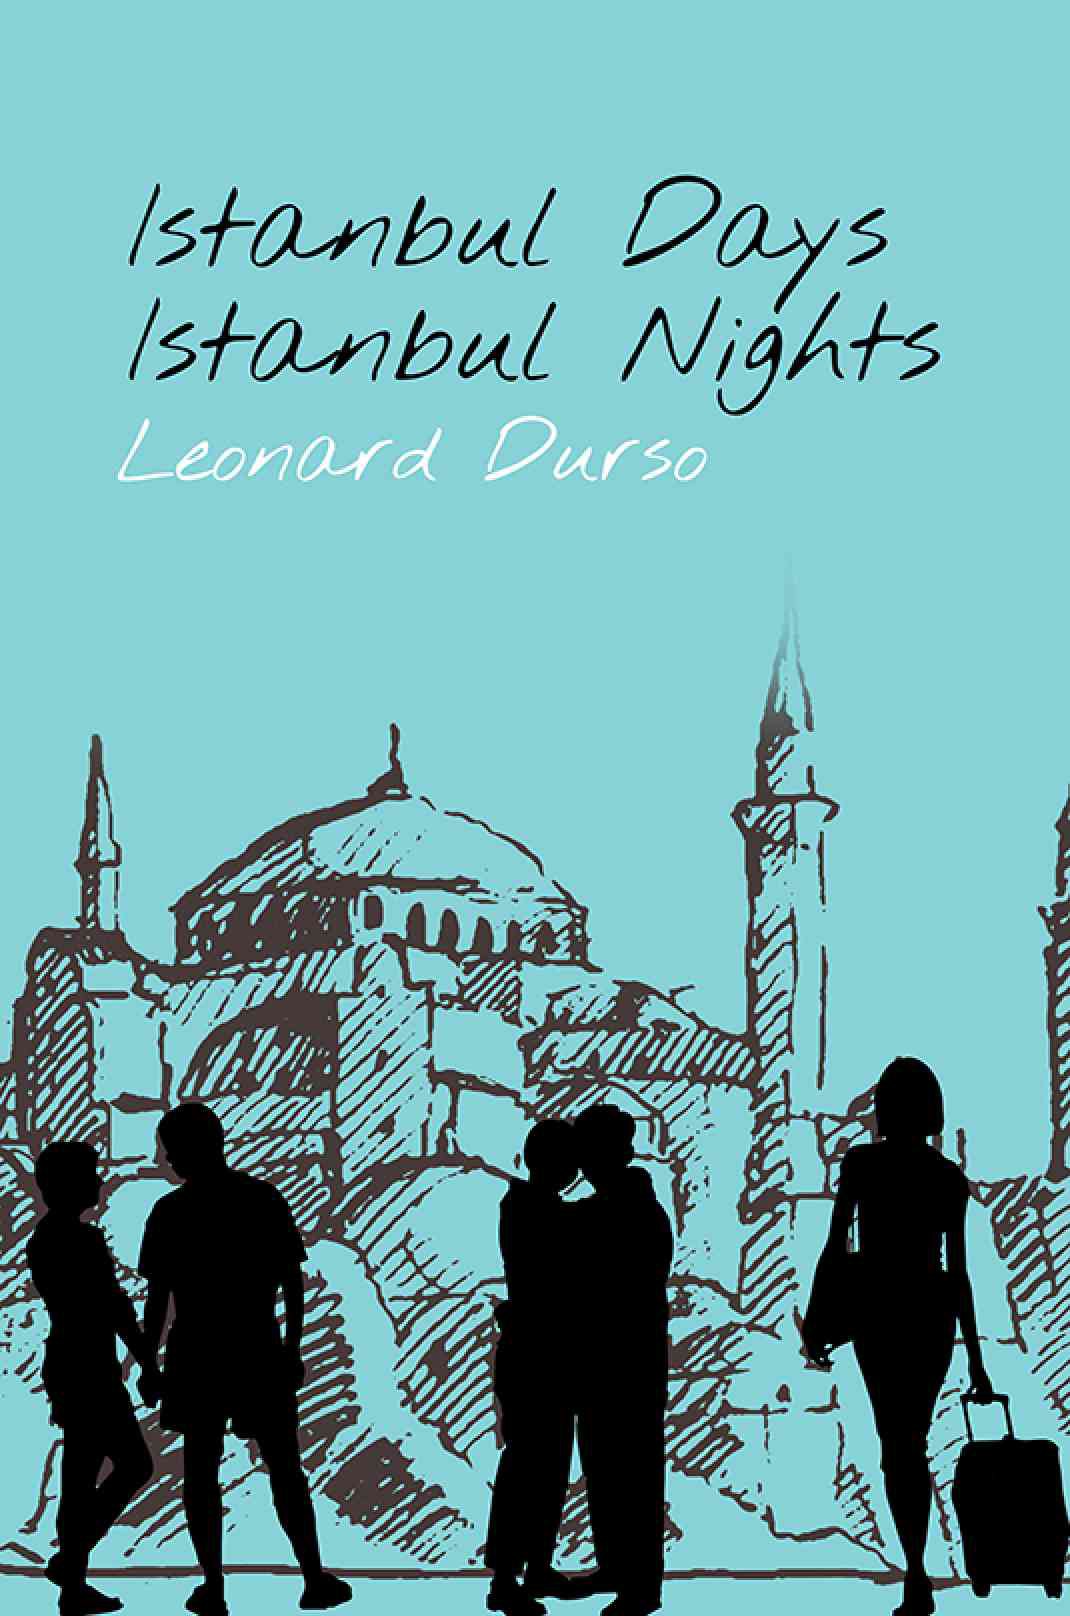 Toot’s Book Reviews gives a verdict on Istanbul Days, Istanbul Nights